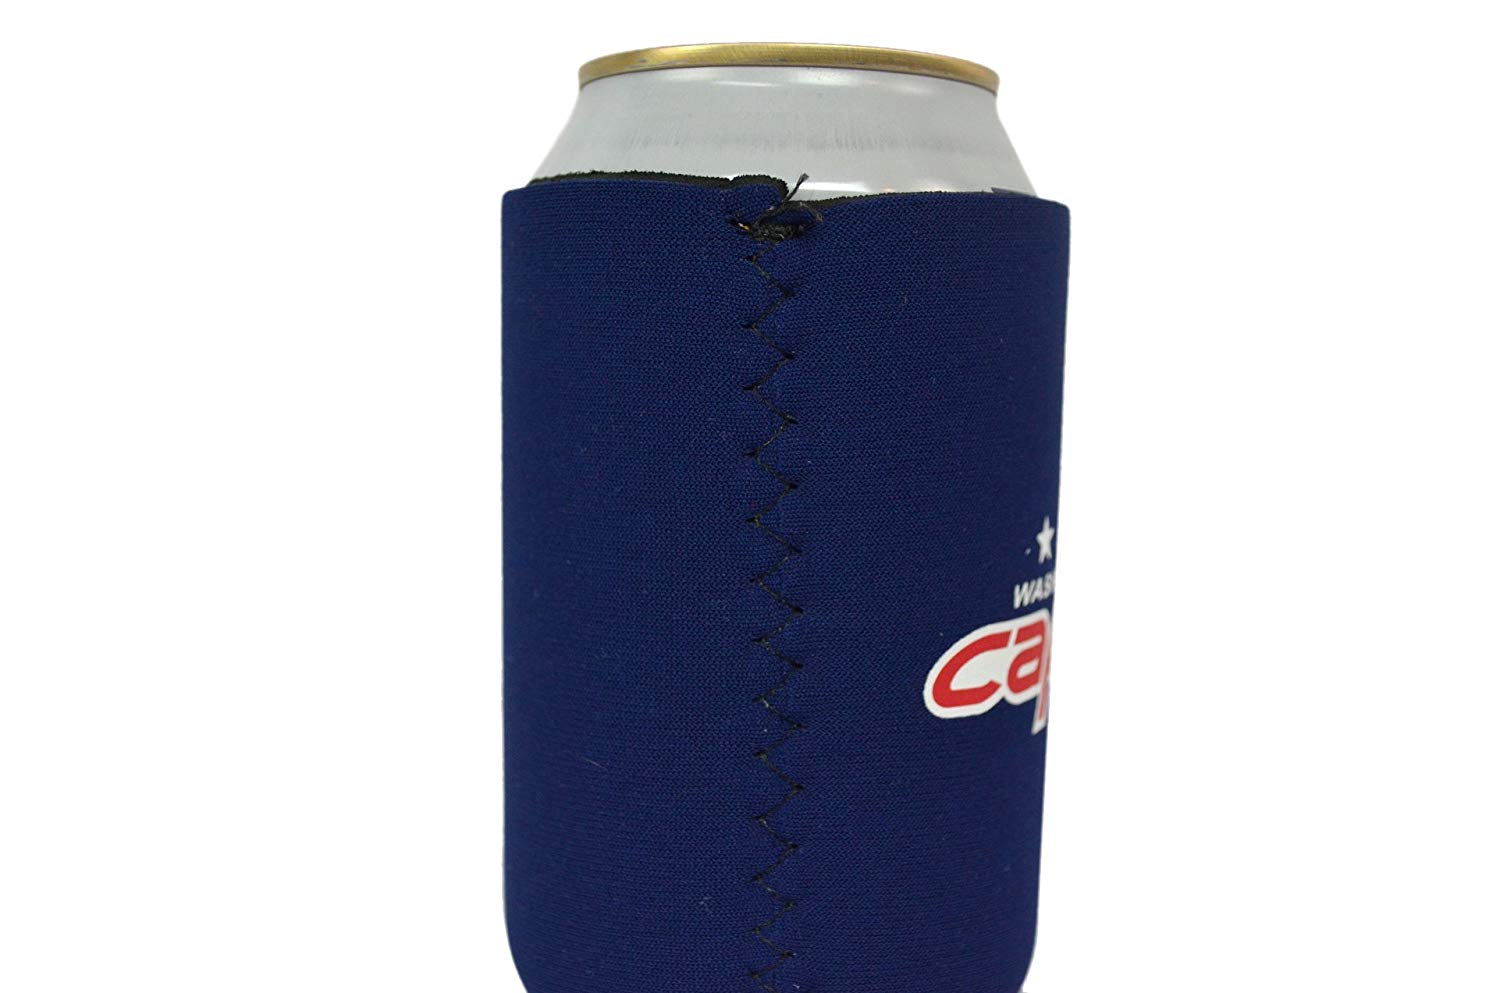 NHL Fan Shop Authentic 2-Pack Insulated 12 Oz Can Cooler. Show Team Pride At Home, Tailgating or at the Game. Great for Fans.